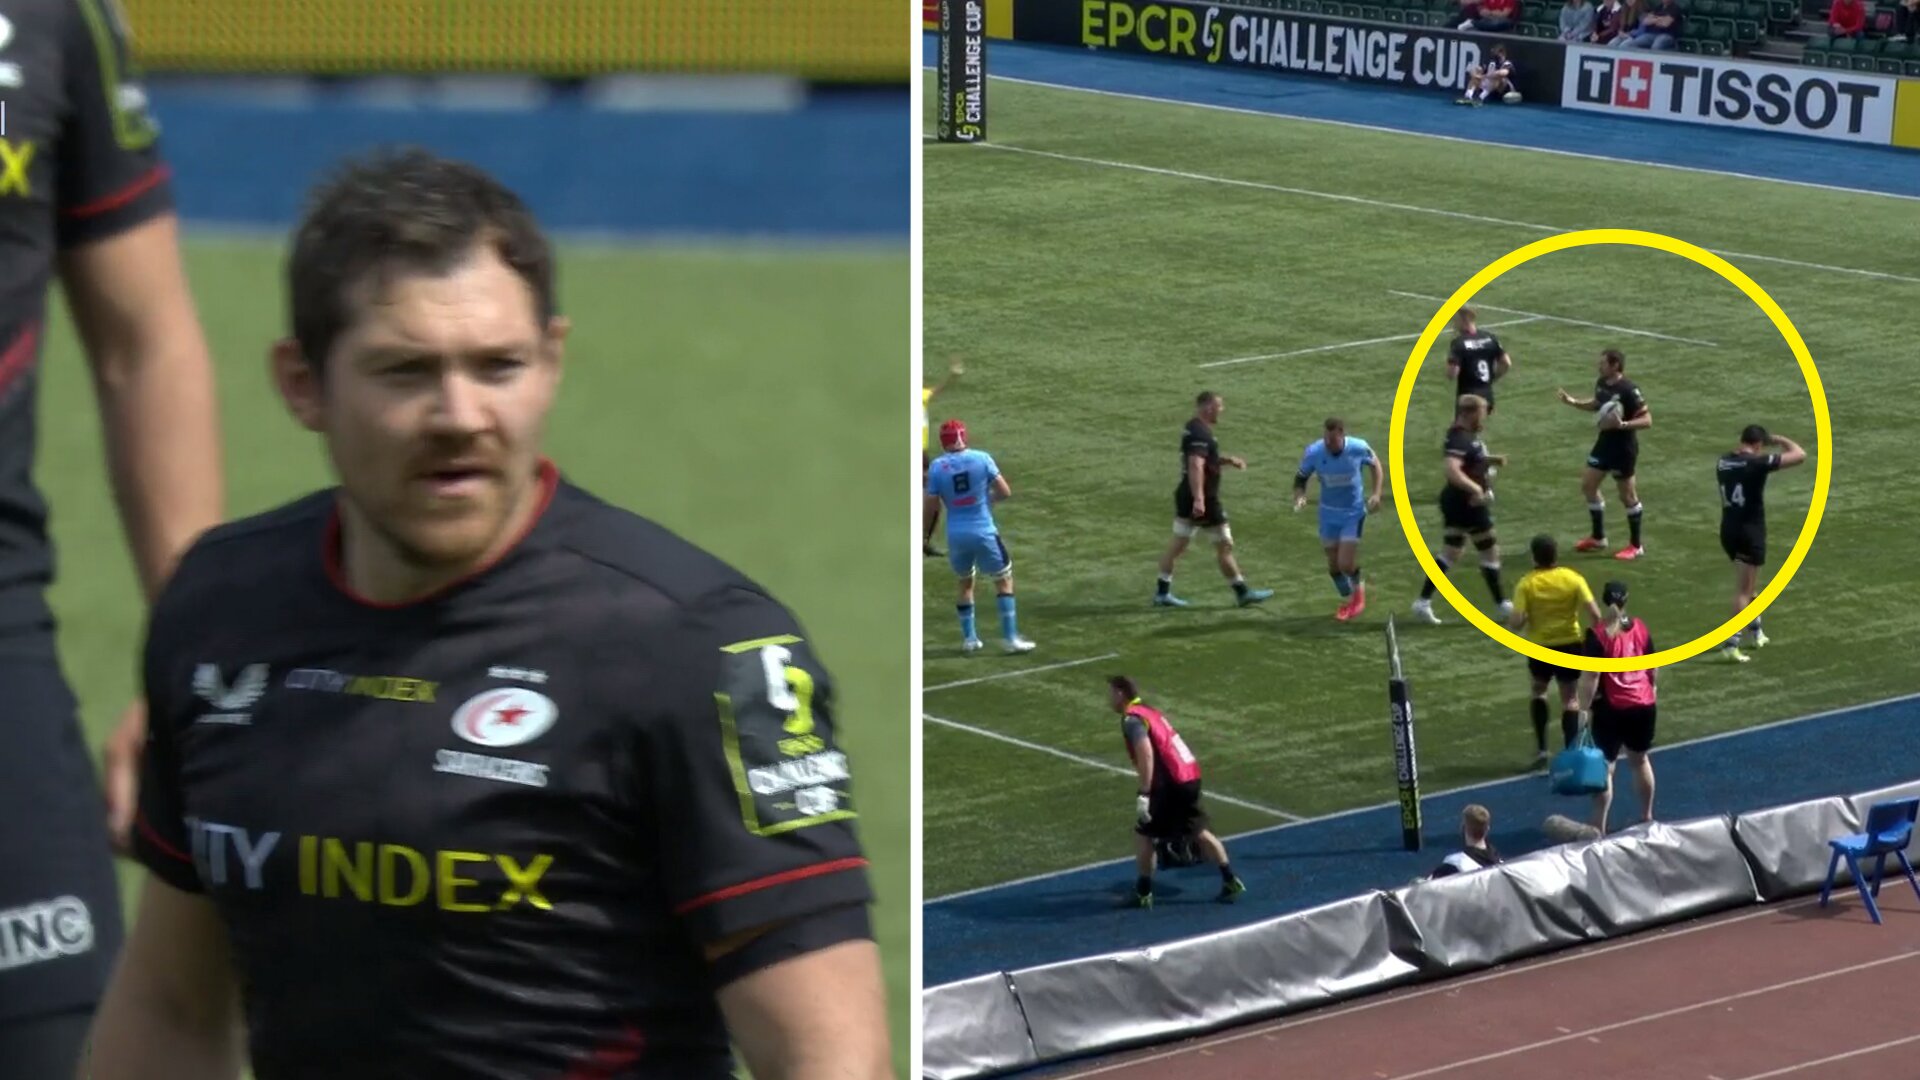 We are finding it hard to believe Alex Goode managed to pull off this 50:22 kick